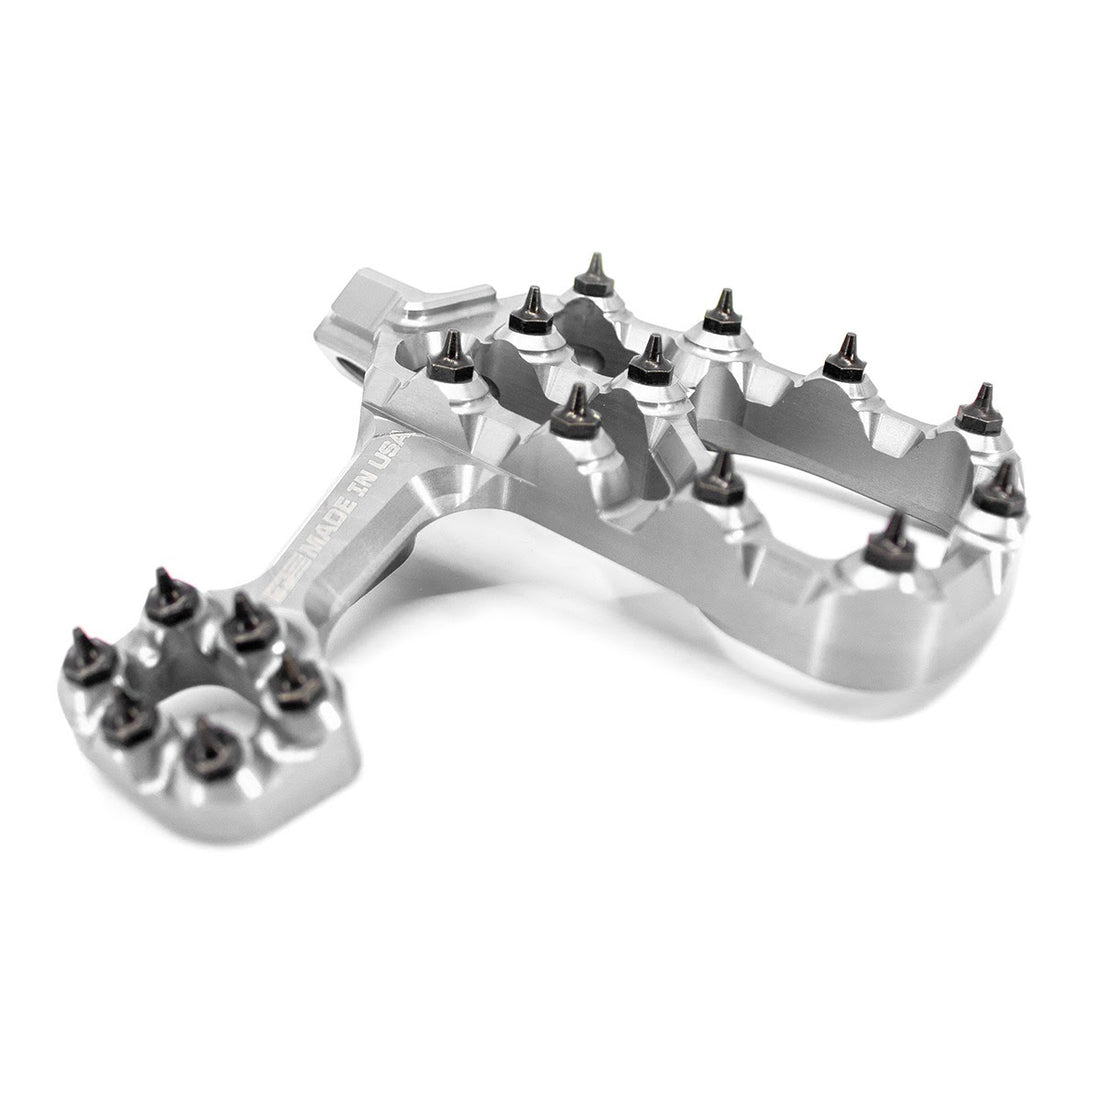 Fastway EXT Footpegs 2023-UP Yamaha YZ450F | 22-4-021